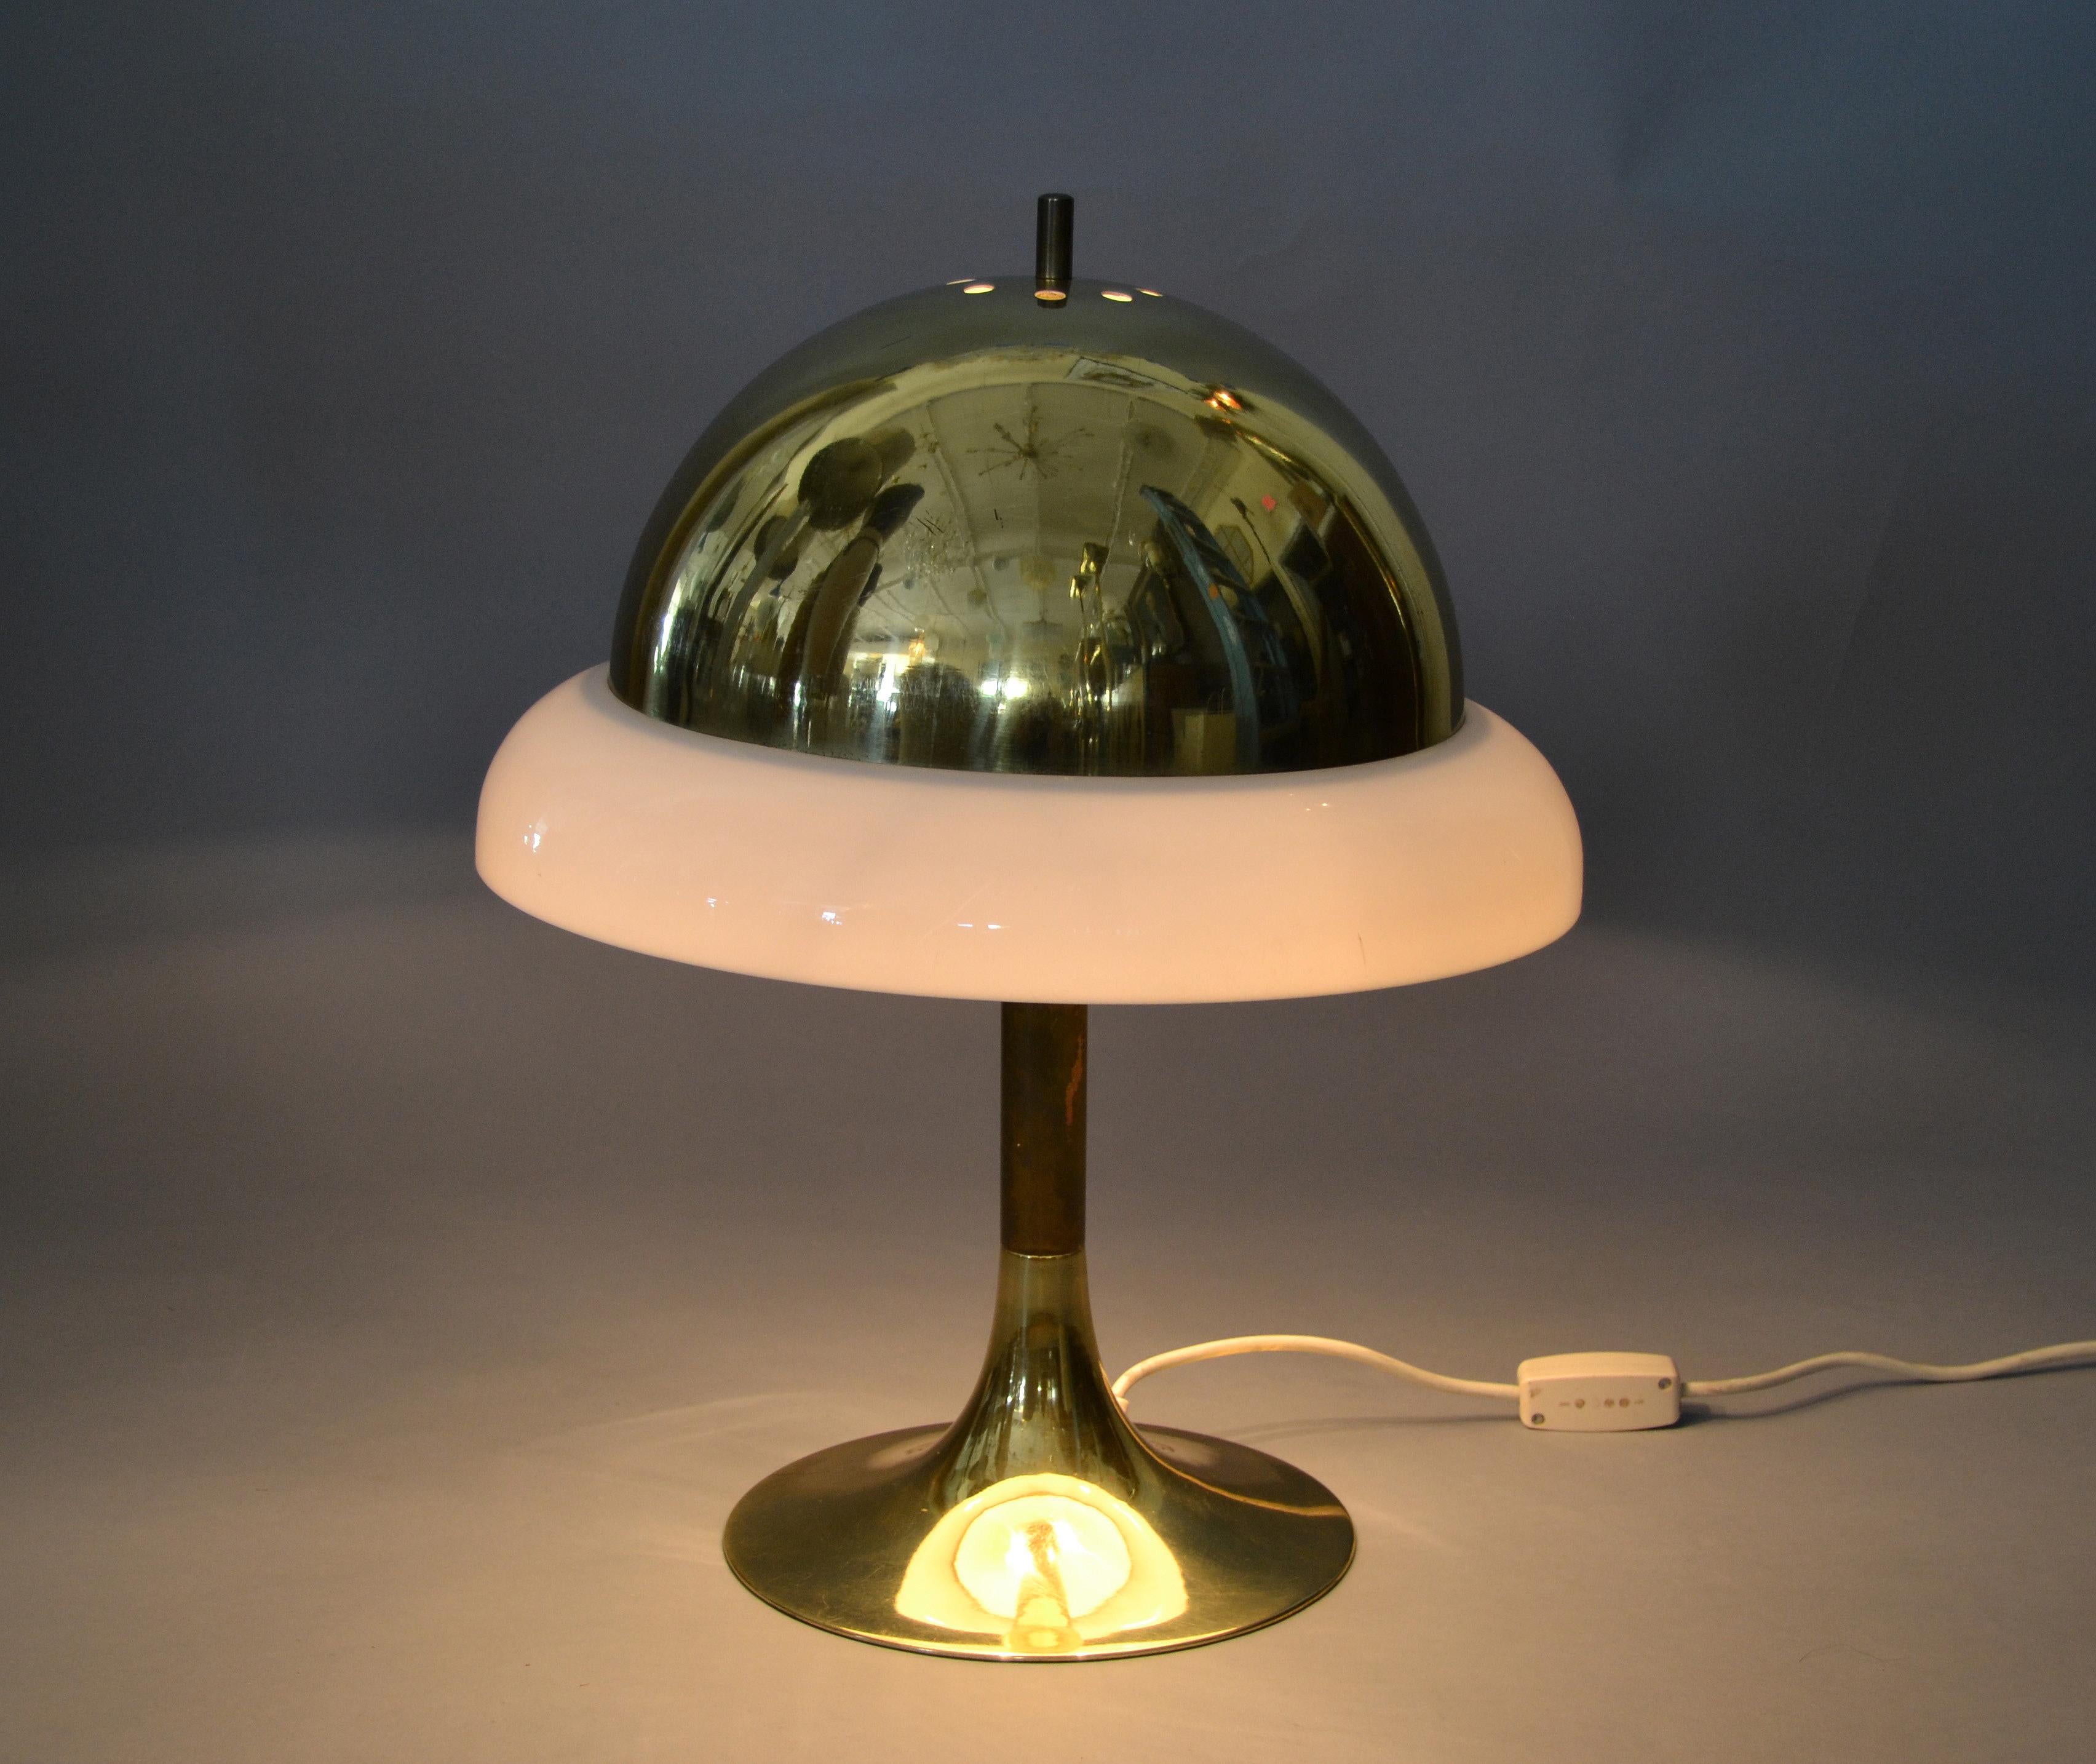 1950s Italian golden Mid-Century Modern desk lamp, table lamp in brass and plastic.
The shade is made out of brass and encircled with a plastic ring.
It is wired for the U.S. and uses 2 max. 40 watts candelabra light bulbs.
The table lamp is in